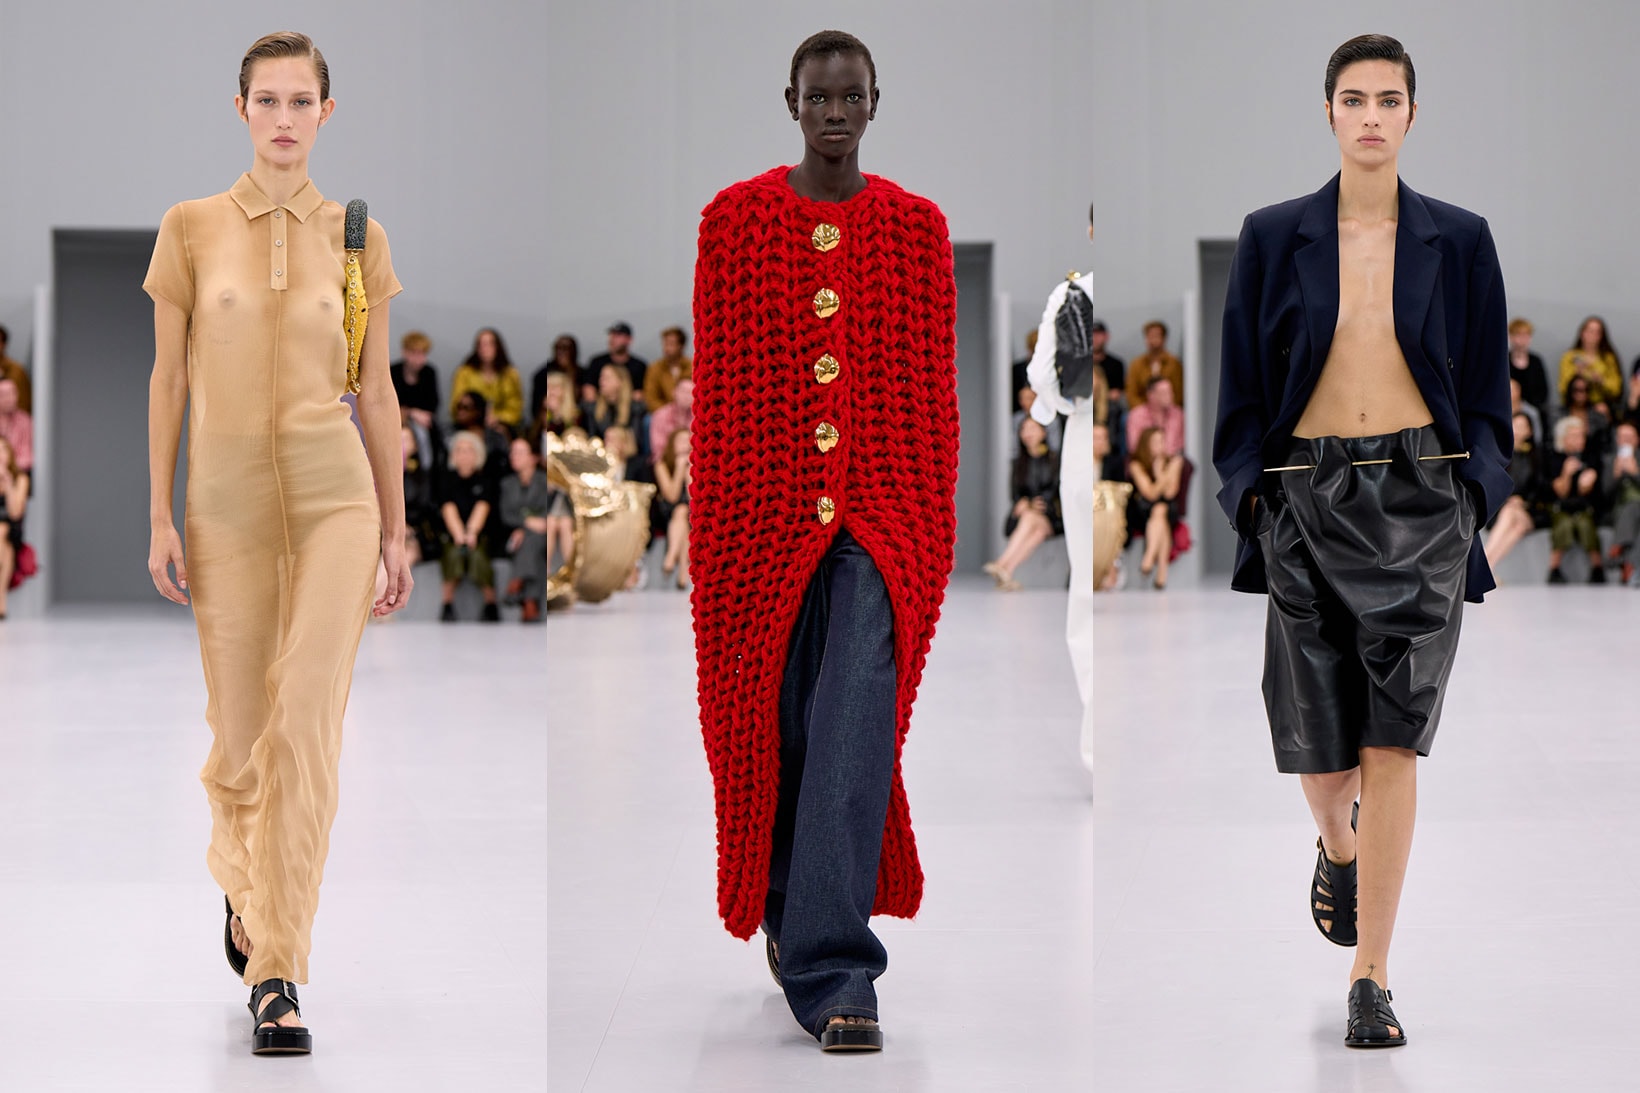 LOEWE: the Hottest Fashion Brand to Take the Top Spot